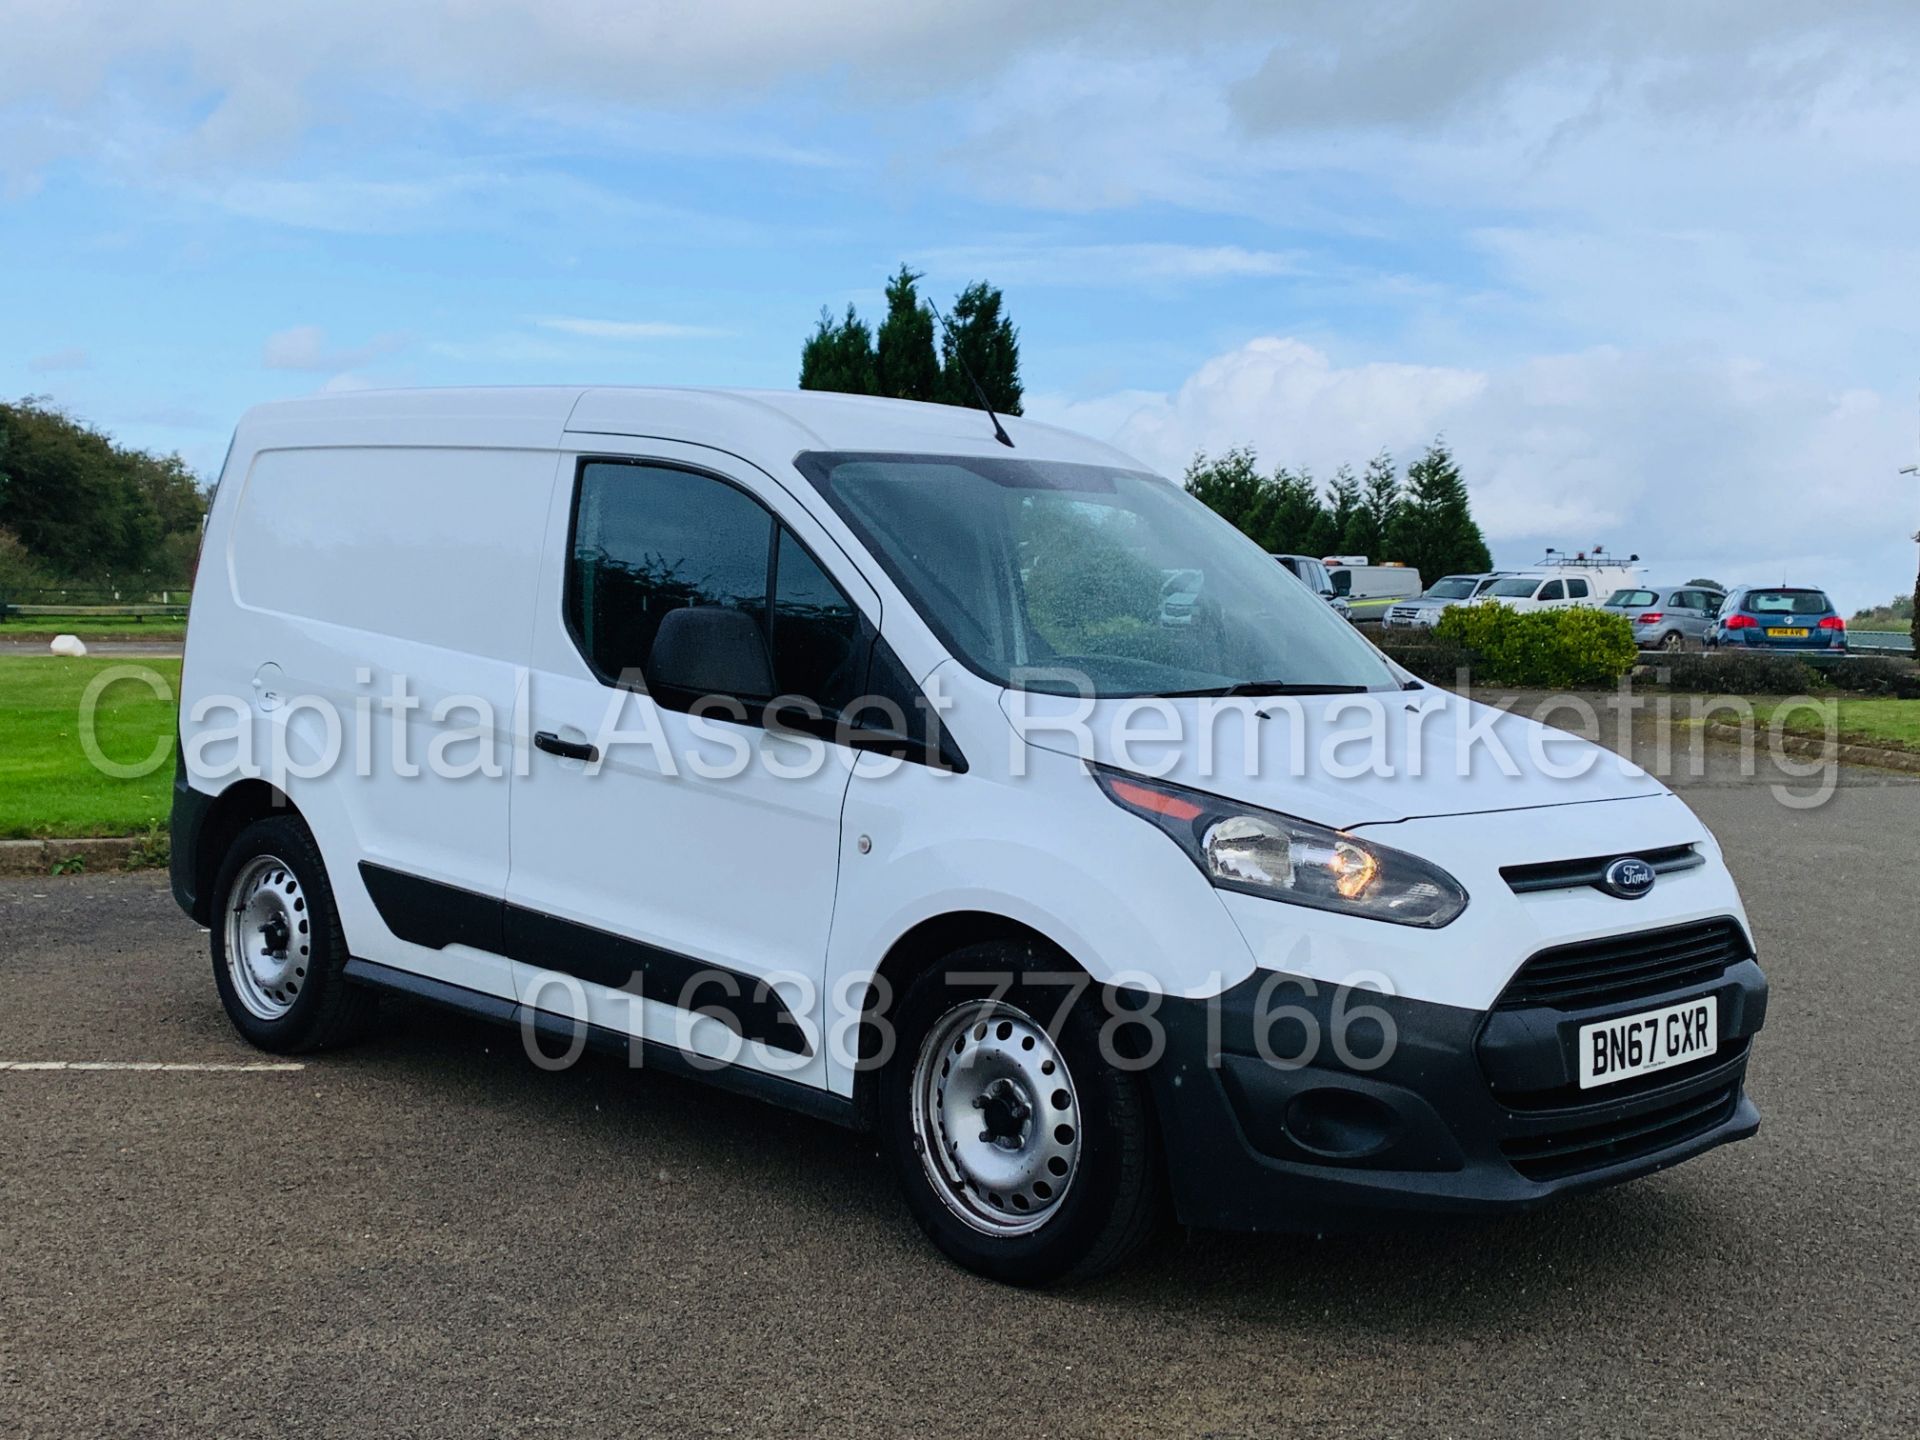 Ford Transit CONNECT 75 T200 *SWB - PANEL VAN* (2018 MODEL) '1.5 TDCI - EURO 6 COMPLIANT' (1 OWNER) - Image 10 of 36